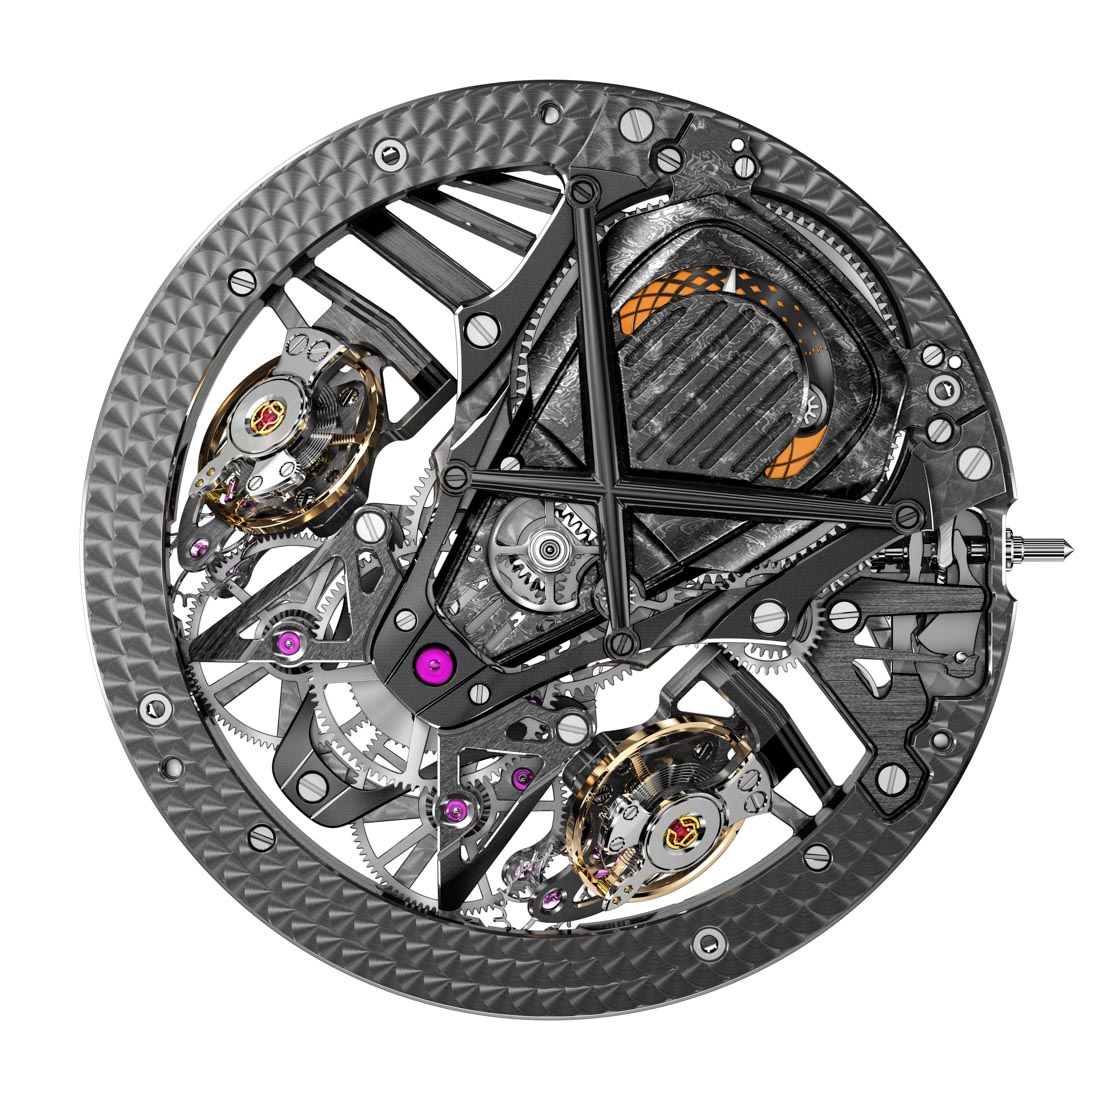 Roger Dubuis Becomes Official Partner Of Lamborghini, Launches 2 Watches With All-New Duotor Caliber Watch Releases 